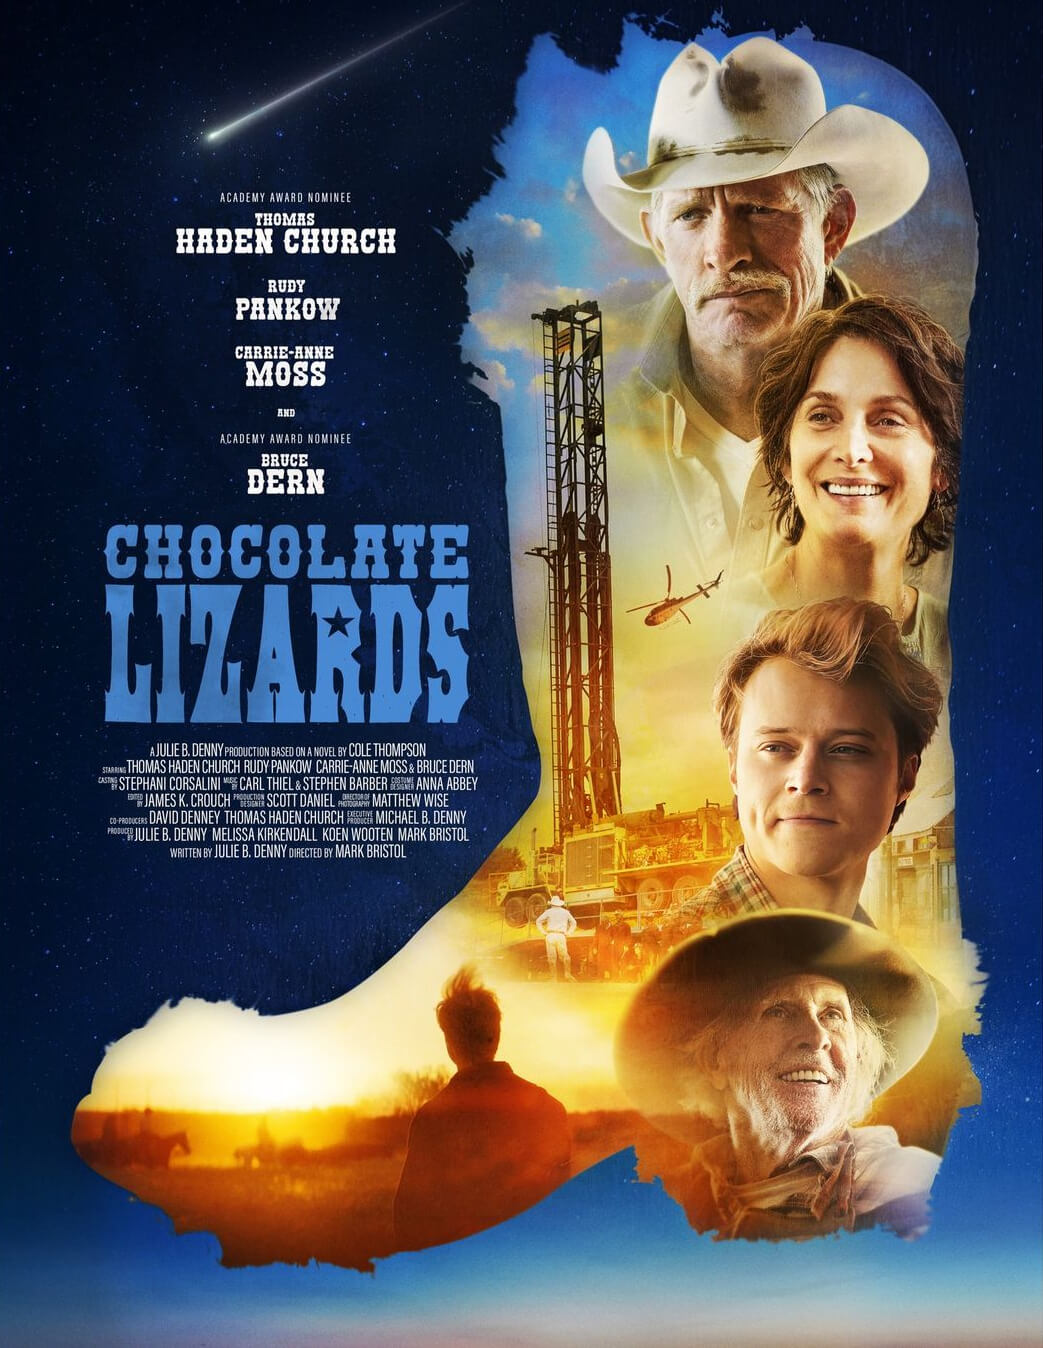 Chocolate Lizards Movie (2023) Cast, Release Date, Story, Budget, Collection, Poster, Trailer, Review